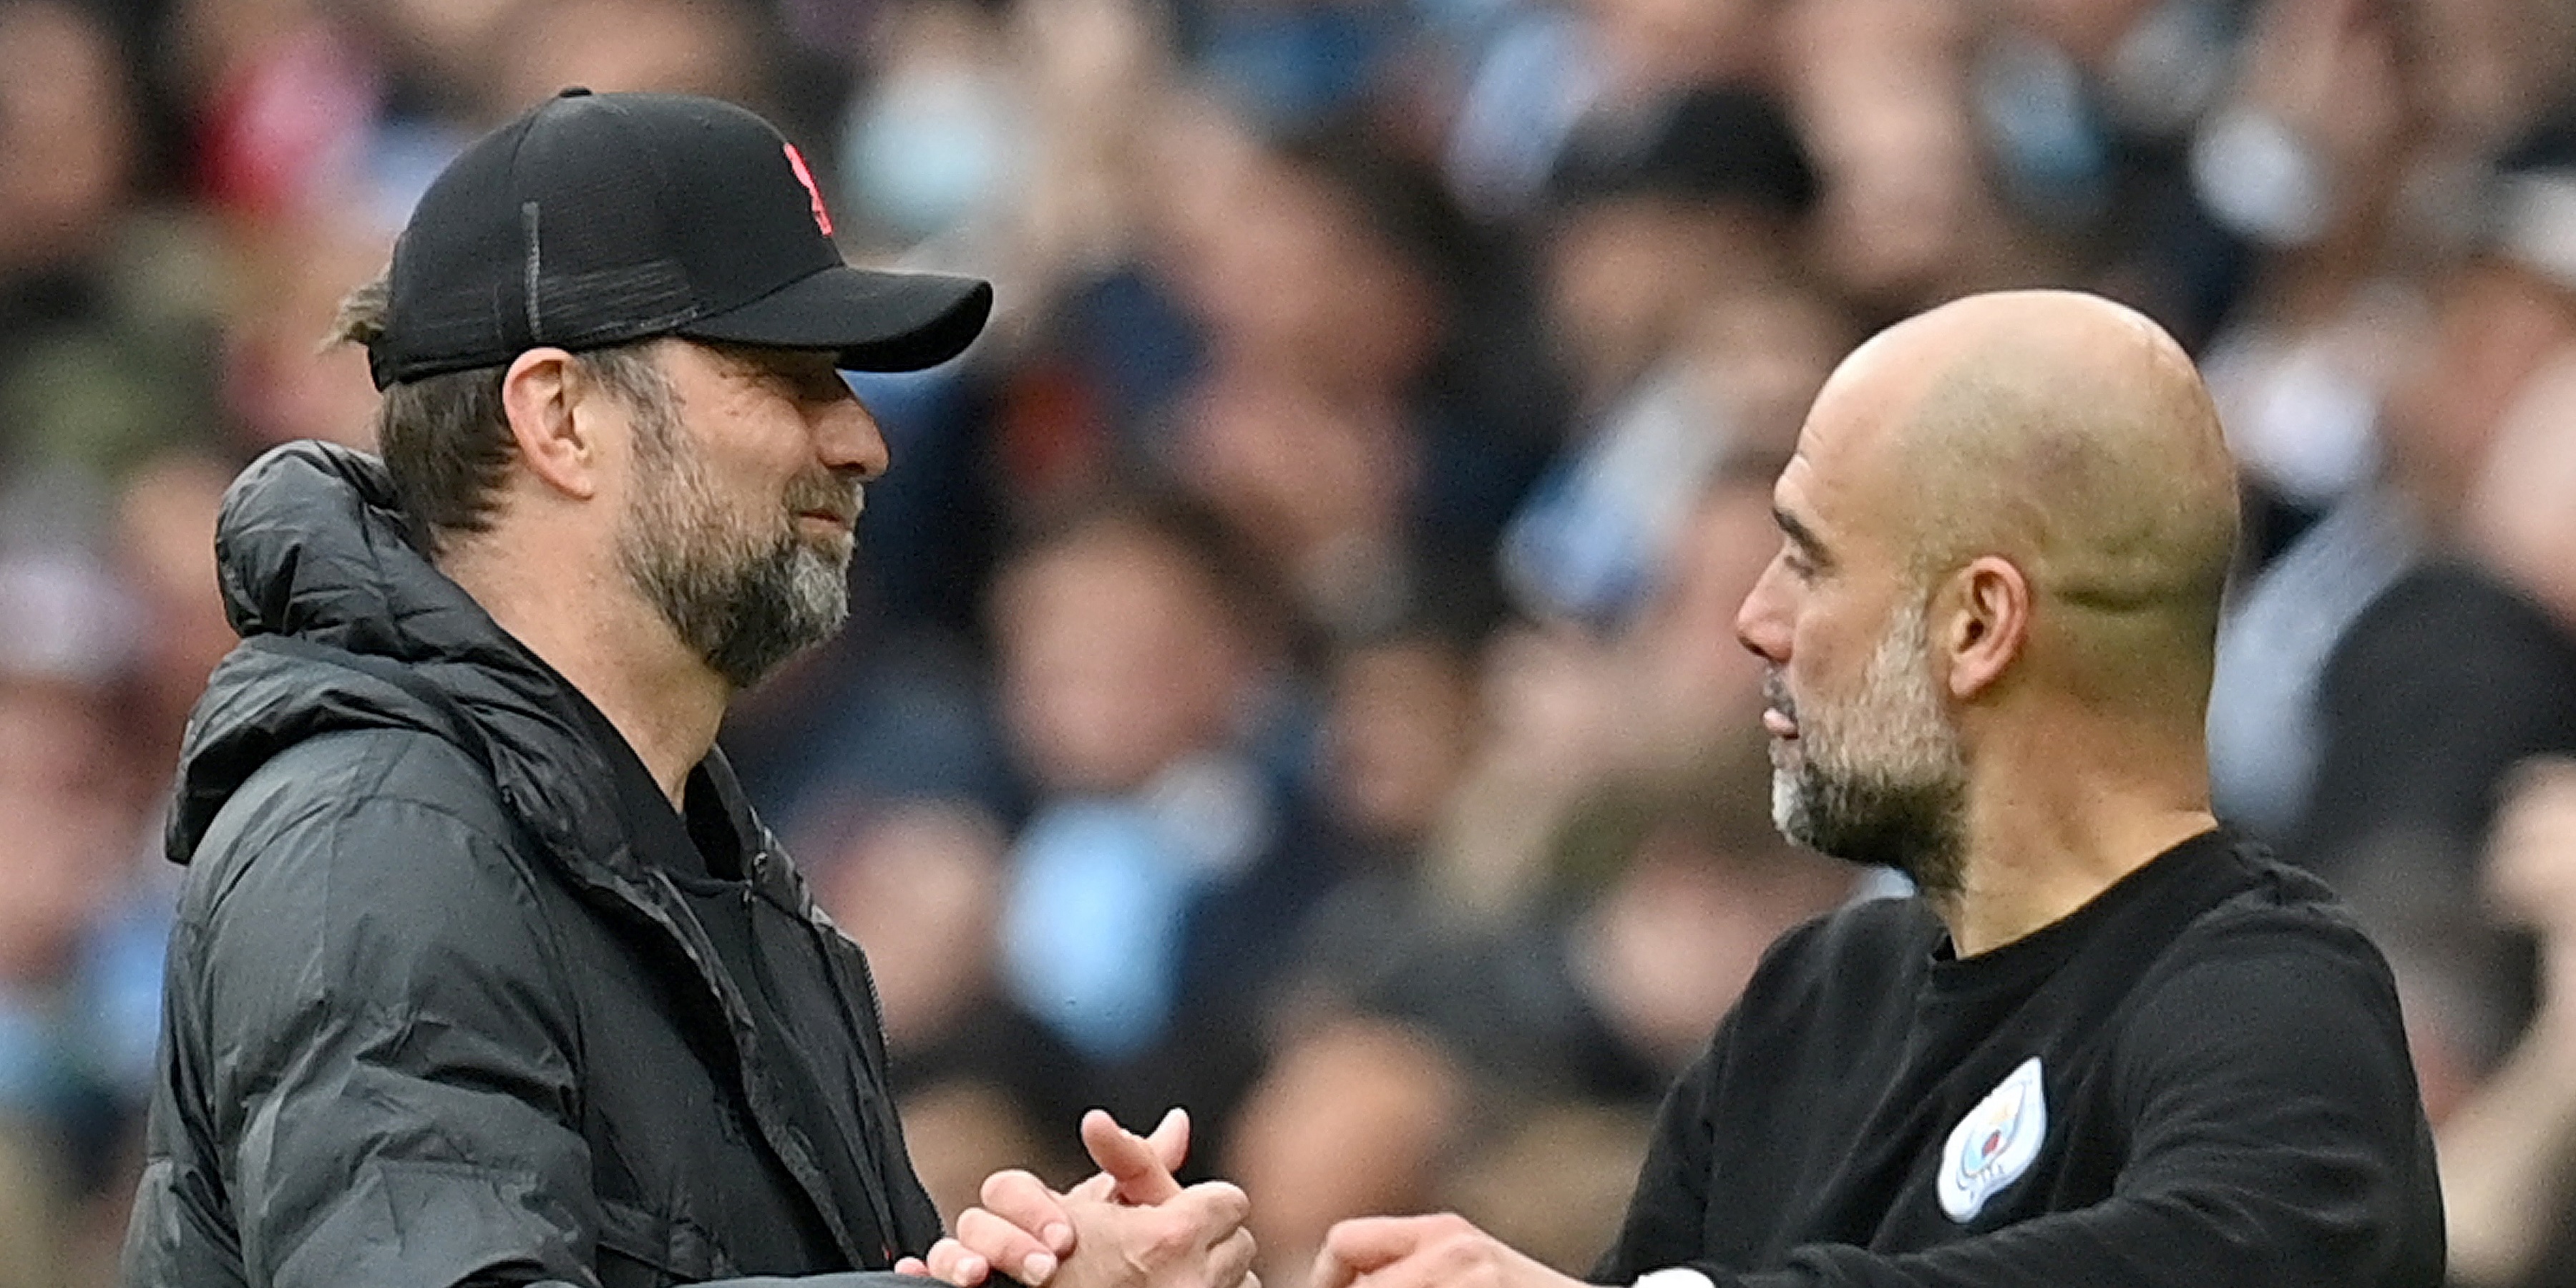 ‘They will wipe the floor with them’ – Chris Sutton’s score prediction for Liverpool’s clash with Manchester City will worry Reds fans